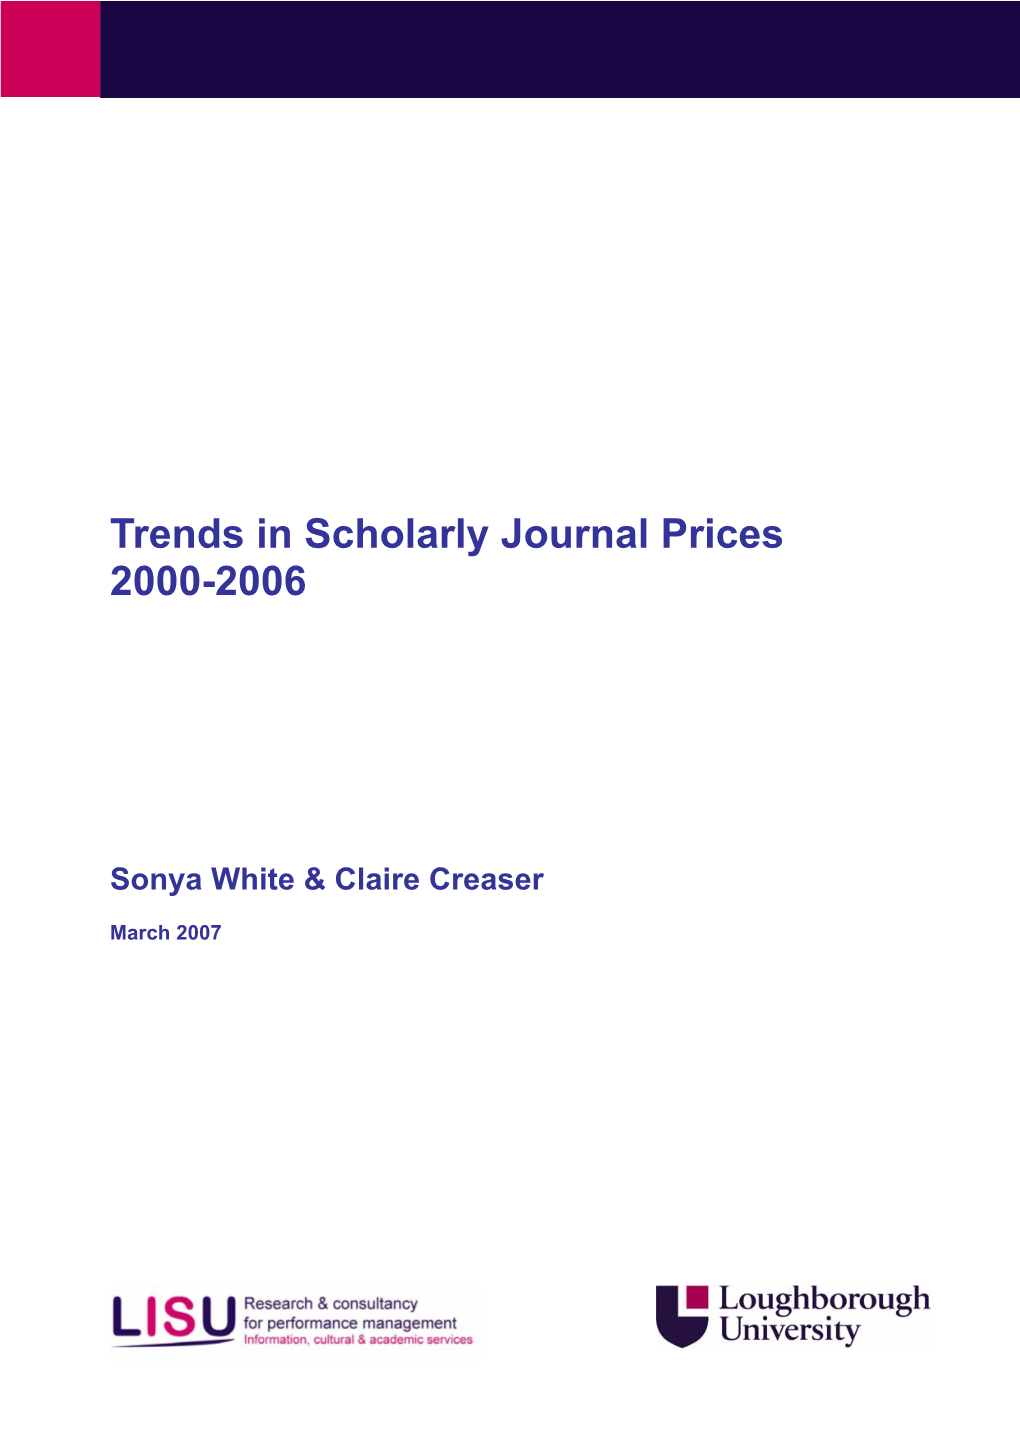 Trends in Scholarly Journal Prices 2000-2006